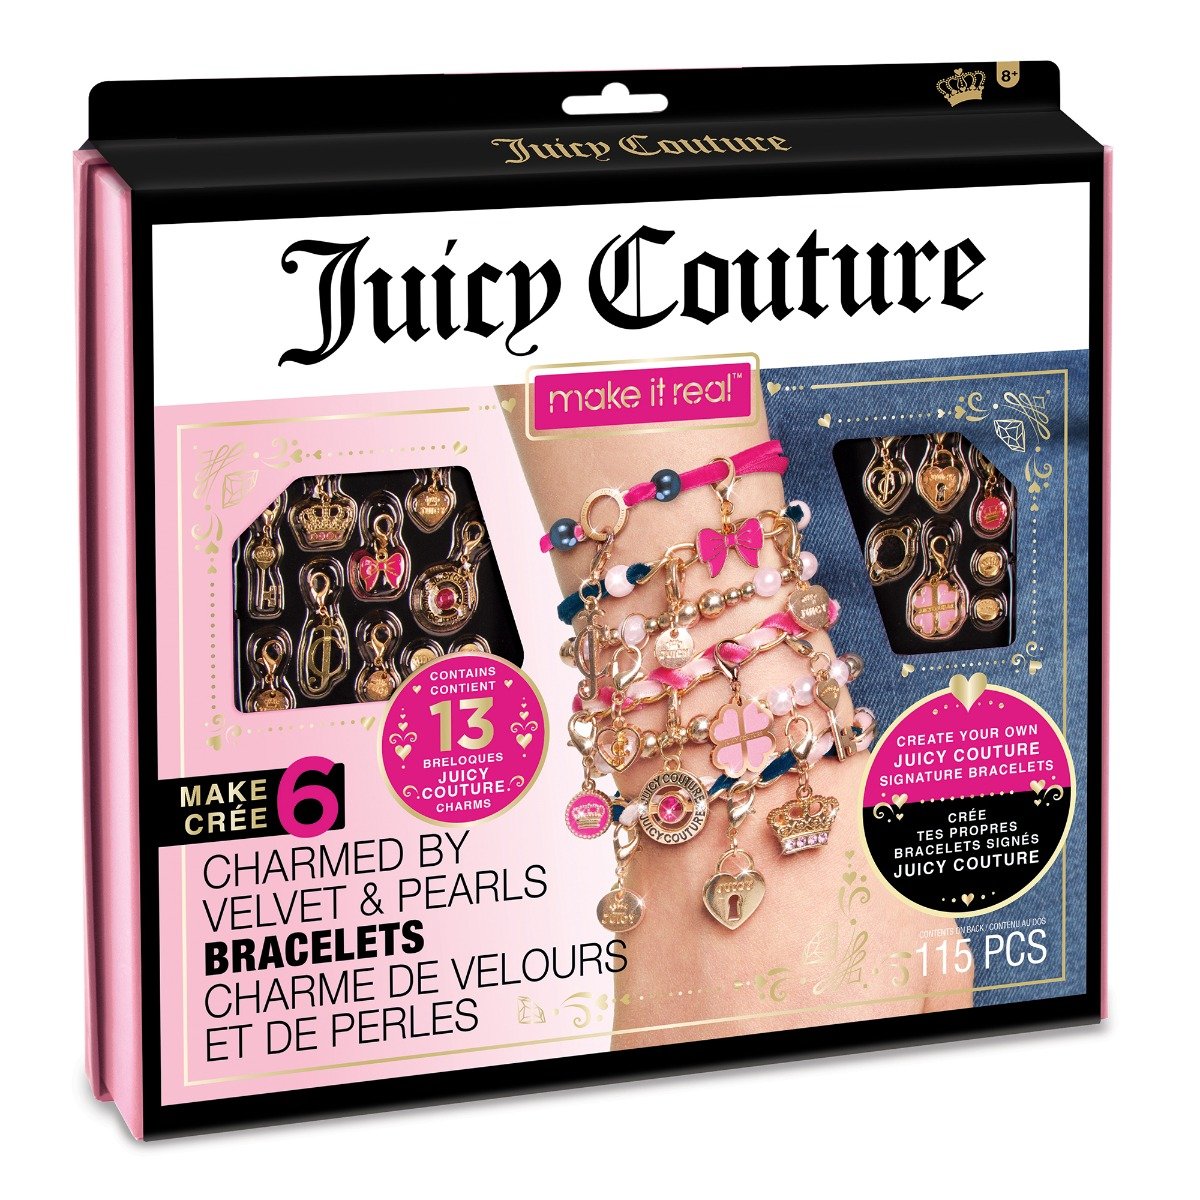 Set de bratari si bijuterii Juicy Couture Charmed By Velvet and Pearls, Make It Real and imagine 2022 protejamcopilaria.ro